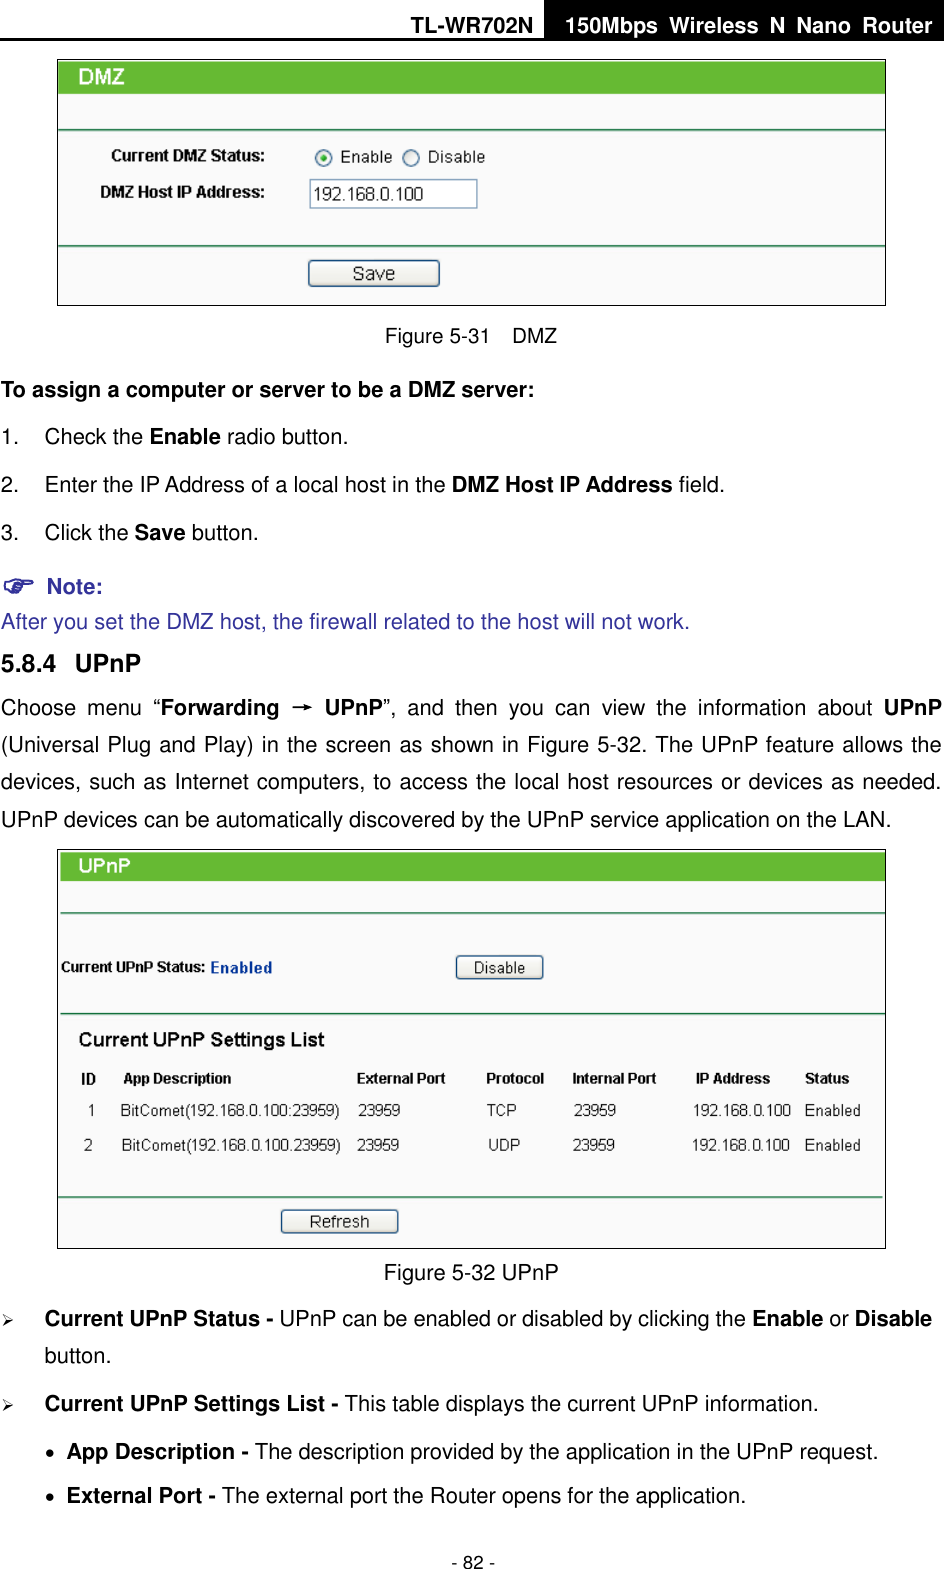 TL-WR702N 150Mbps  Wireless  N  Nano  Router  - 82 -  Figure 5-31  DMZ To assign a computer or server to be a DMZ server:   1.  Check the Enable radio button. 2.  Enter the IP Address of a local host in the DMZ Host IP Address field. 3.  Click the Save button.  Note:   After you set the DMZ host, the firewall related to the host will not work. 5.8.4  UPnP Choose  menu  “Forwarding  →  UPnP”,  and  then  you  can  view  the  information  about  UPnP (Universal Plug and Play) in the screen as shown in Figure 5-32. The UPnP feature allows the devices, such as Internet computers, to access the local host resources or devices as needed. UPnP devices can be automatically discovered by the UPnP service application on the LAN.  Figure 5-32 UPnP    Current UPnP Status - UPnP can be enabled or disabled by clicking the Enable or Disable button.    Current UPnP Settings List - This table displays the current UPnP information.  App Description - The description provided by the application in the UPnP request.  External Port - The external port the Router opens for the application. 